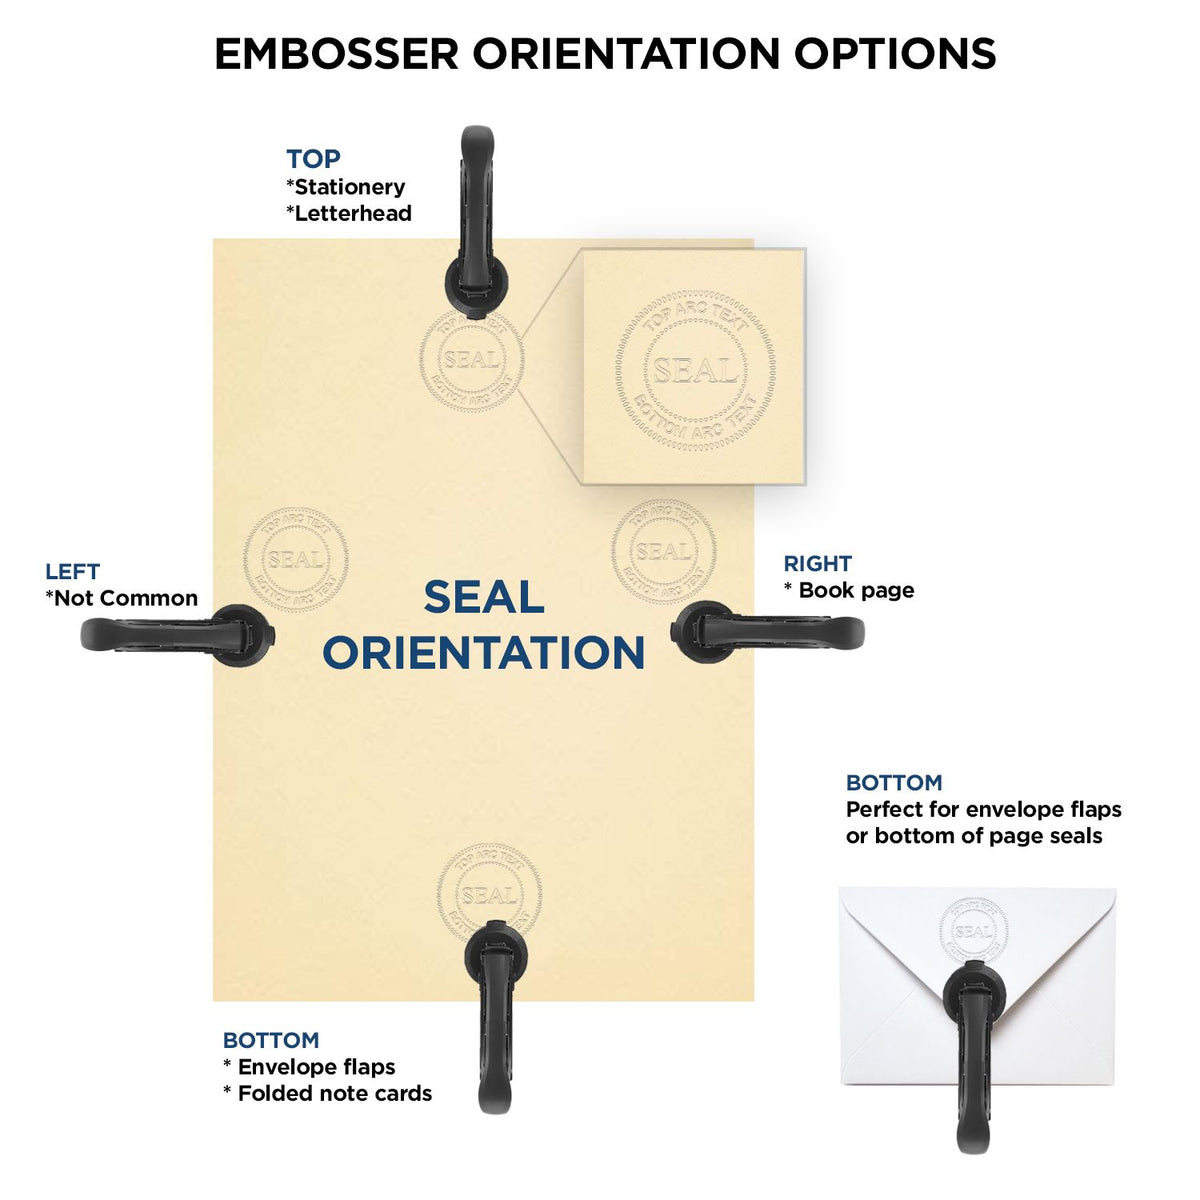 An infographic for the Handheld Florida Architect Seal Embosser showing embosser orientation, this is showing examples of a top, bottom, right and left insert.